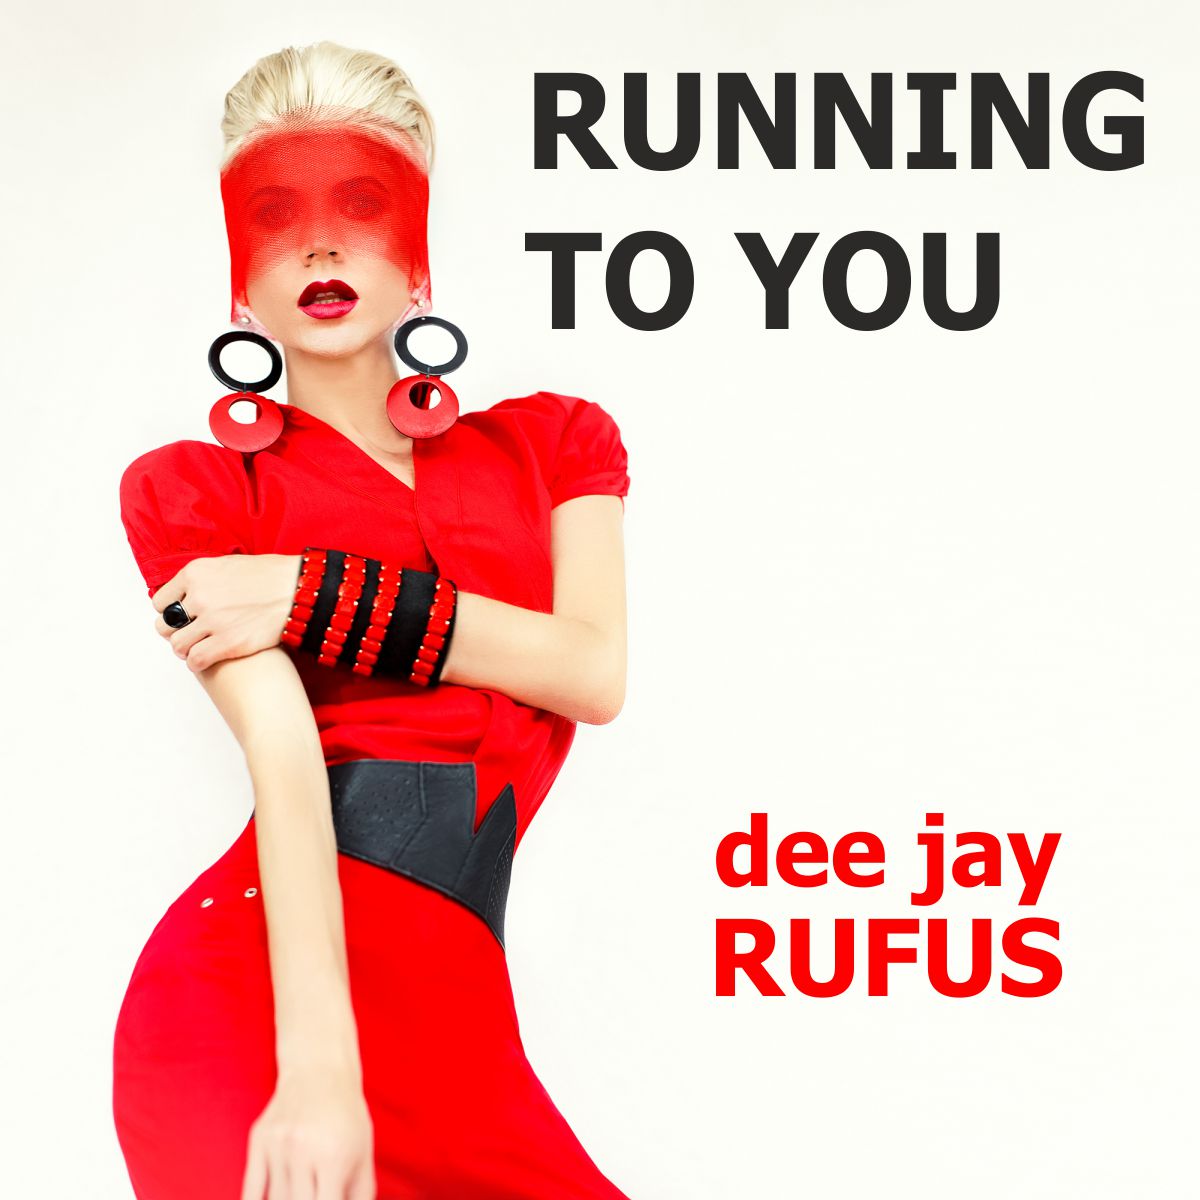 dee jay Rufus - Running to you - Frontcover.jpg